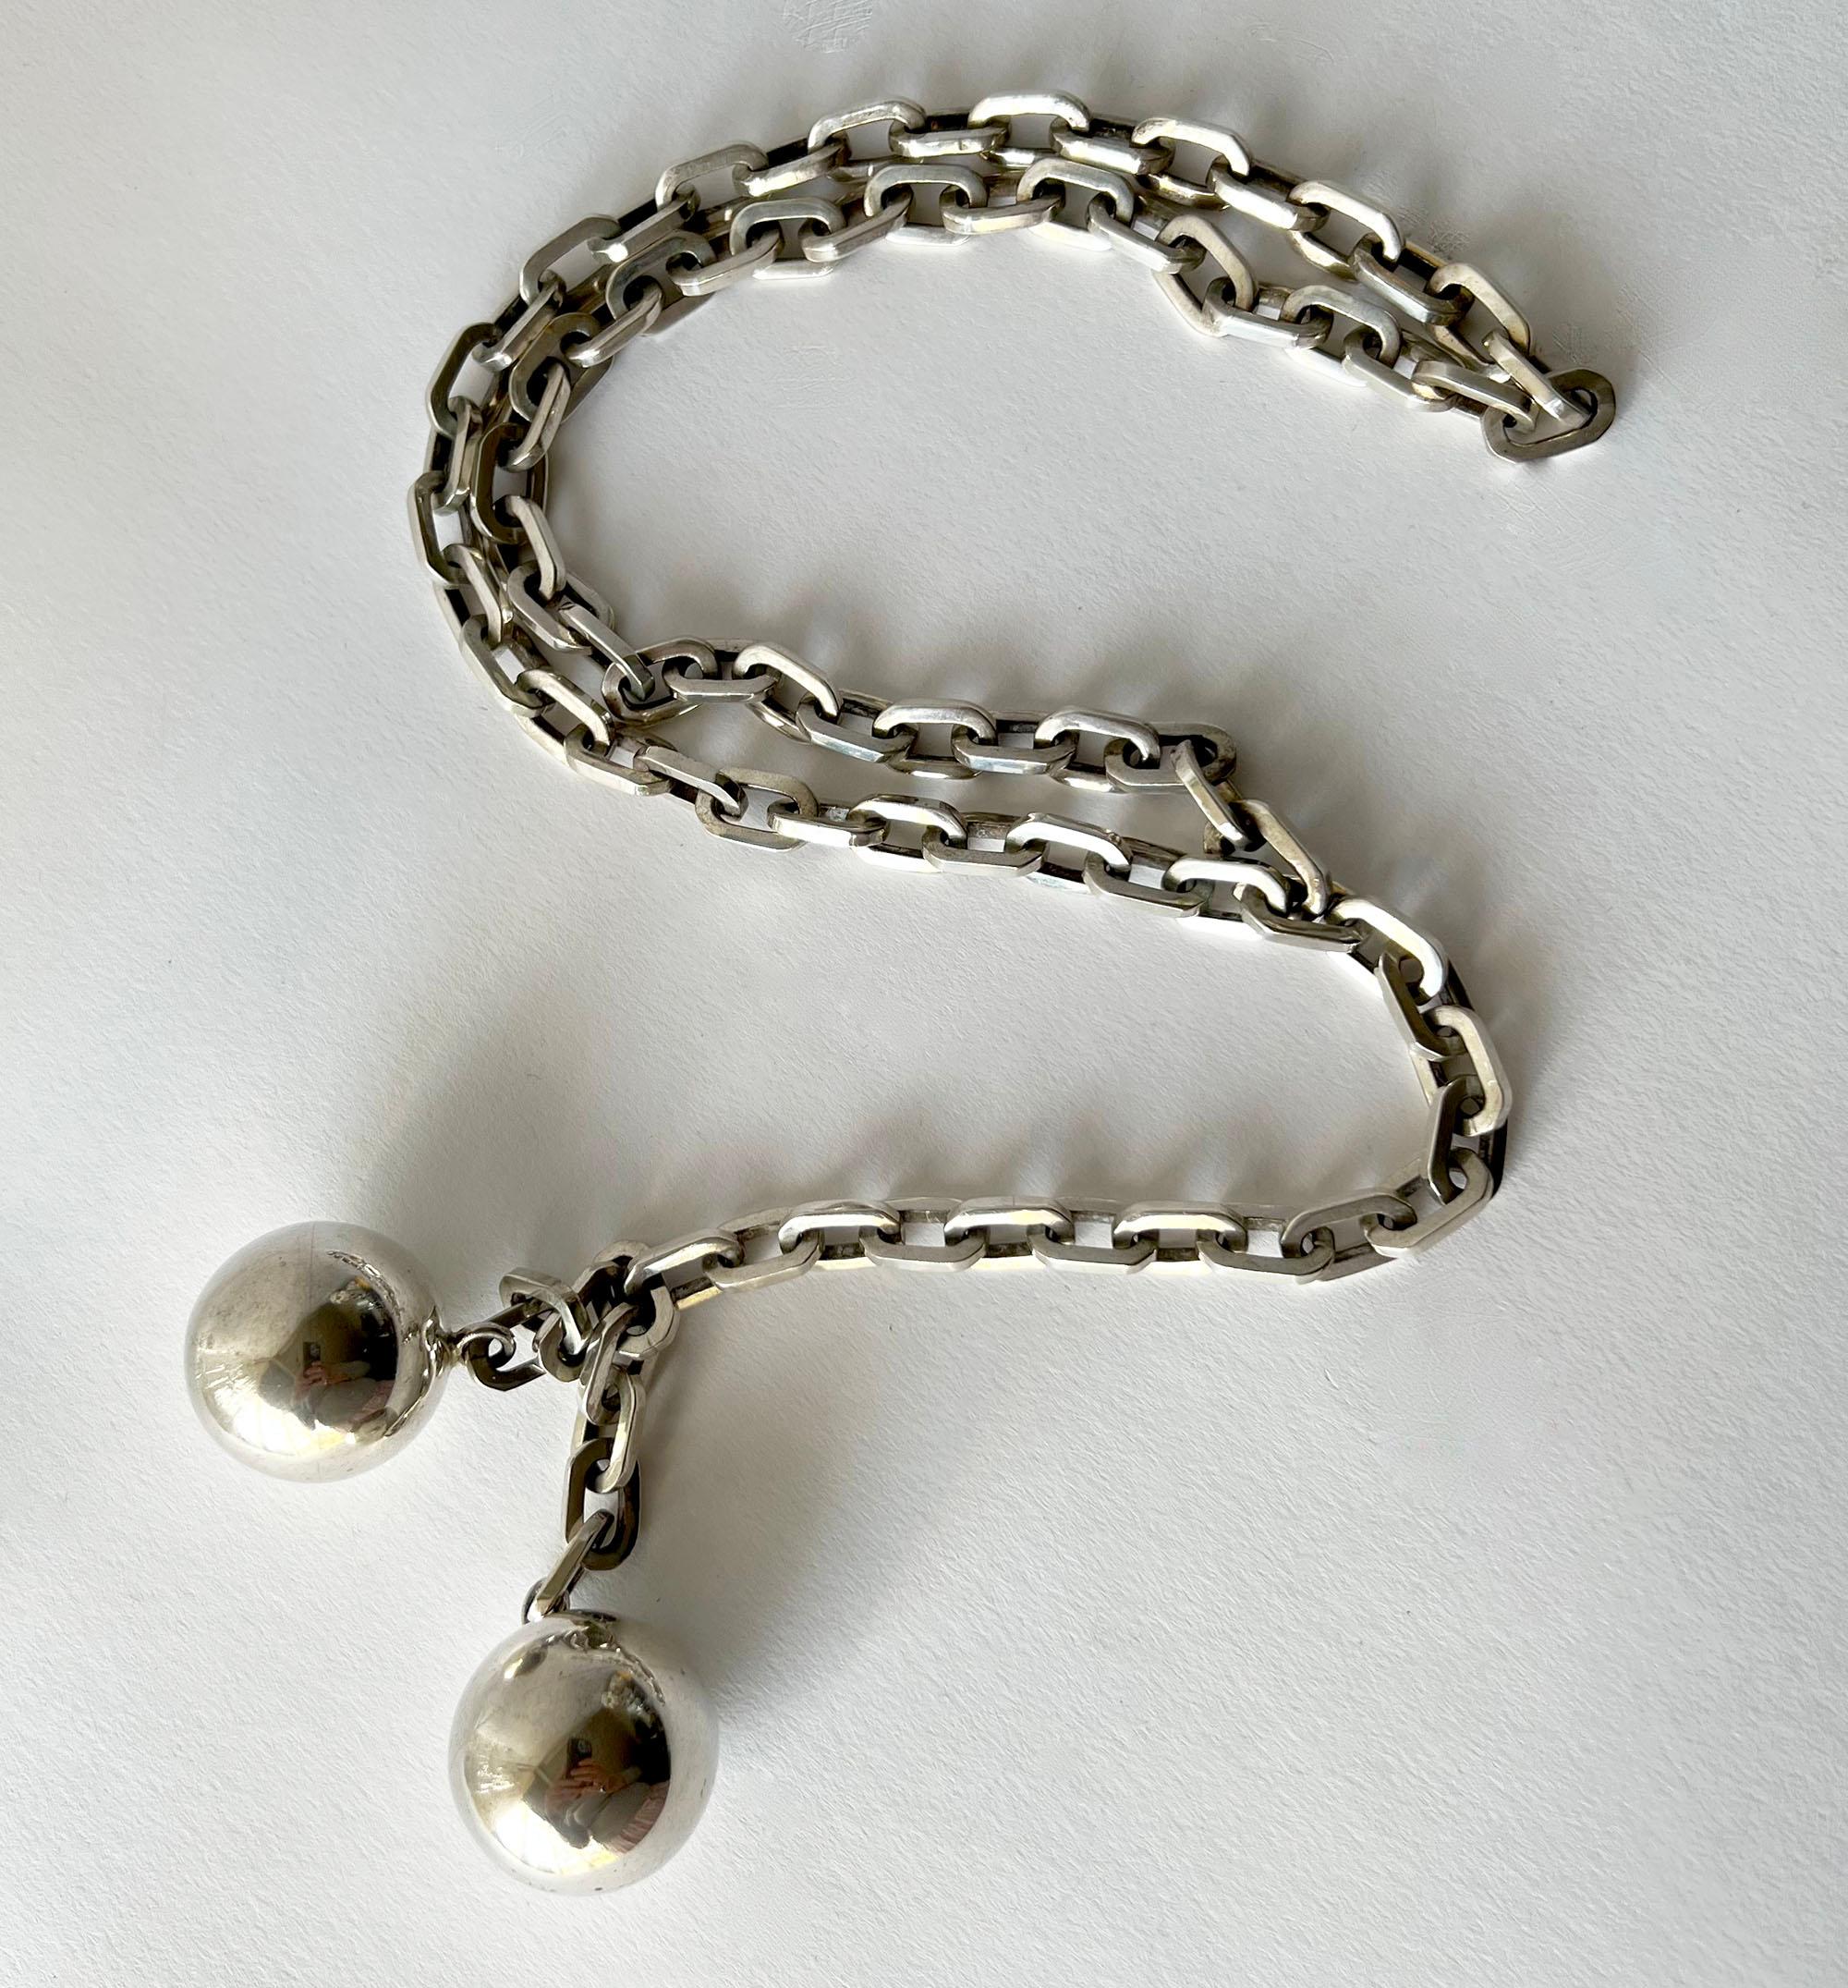 Women's 1960s Mexican Modernist Sterling Silver Ball and Chain Lariat Necklace